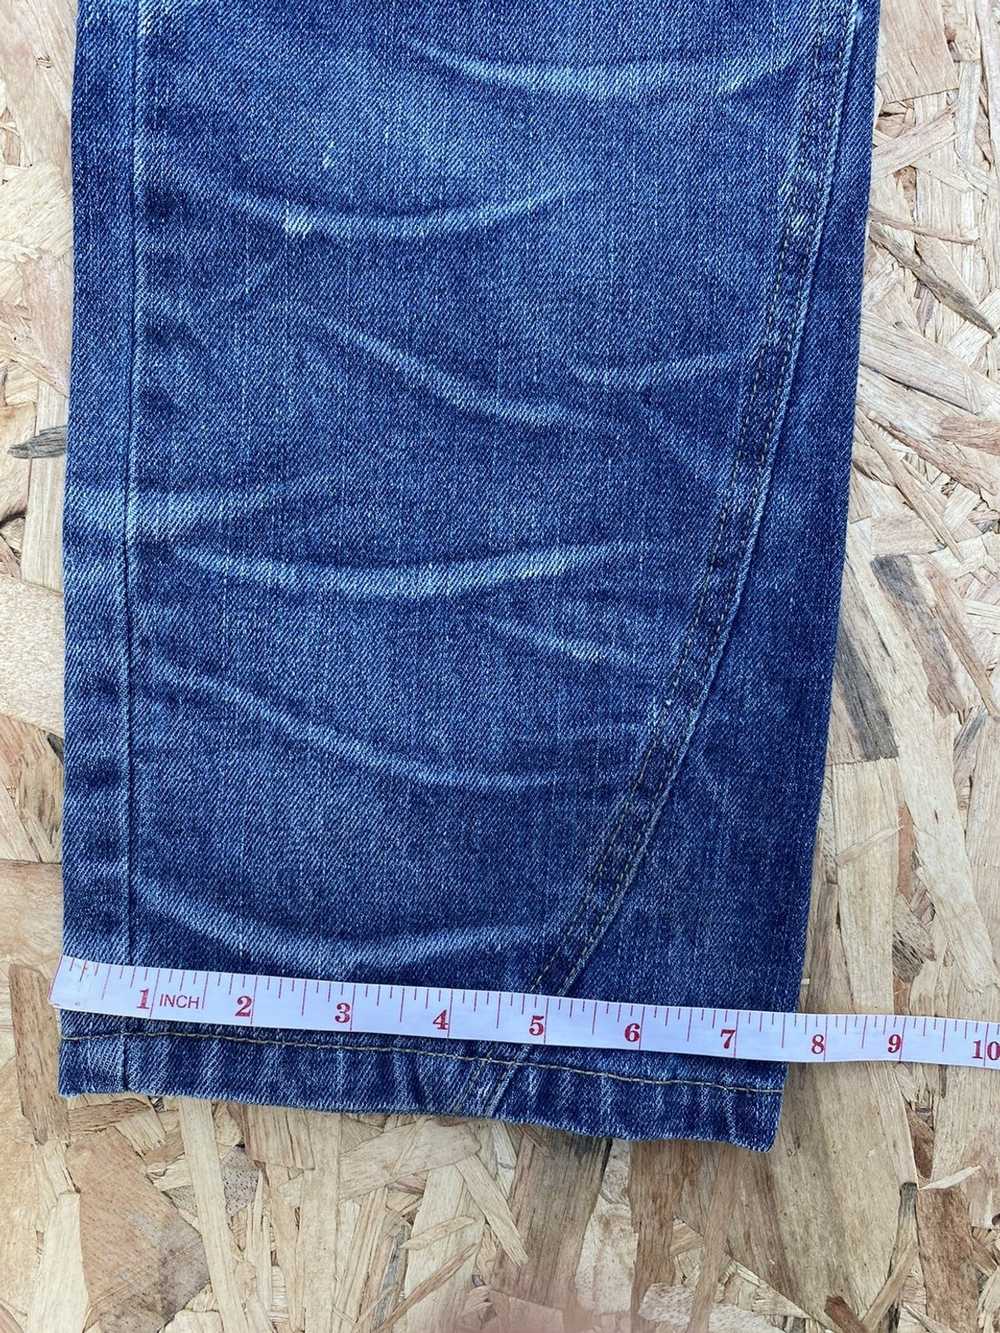 Japanese Brand Smiley Face Jeans - image 10